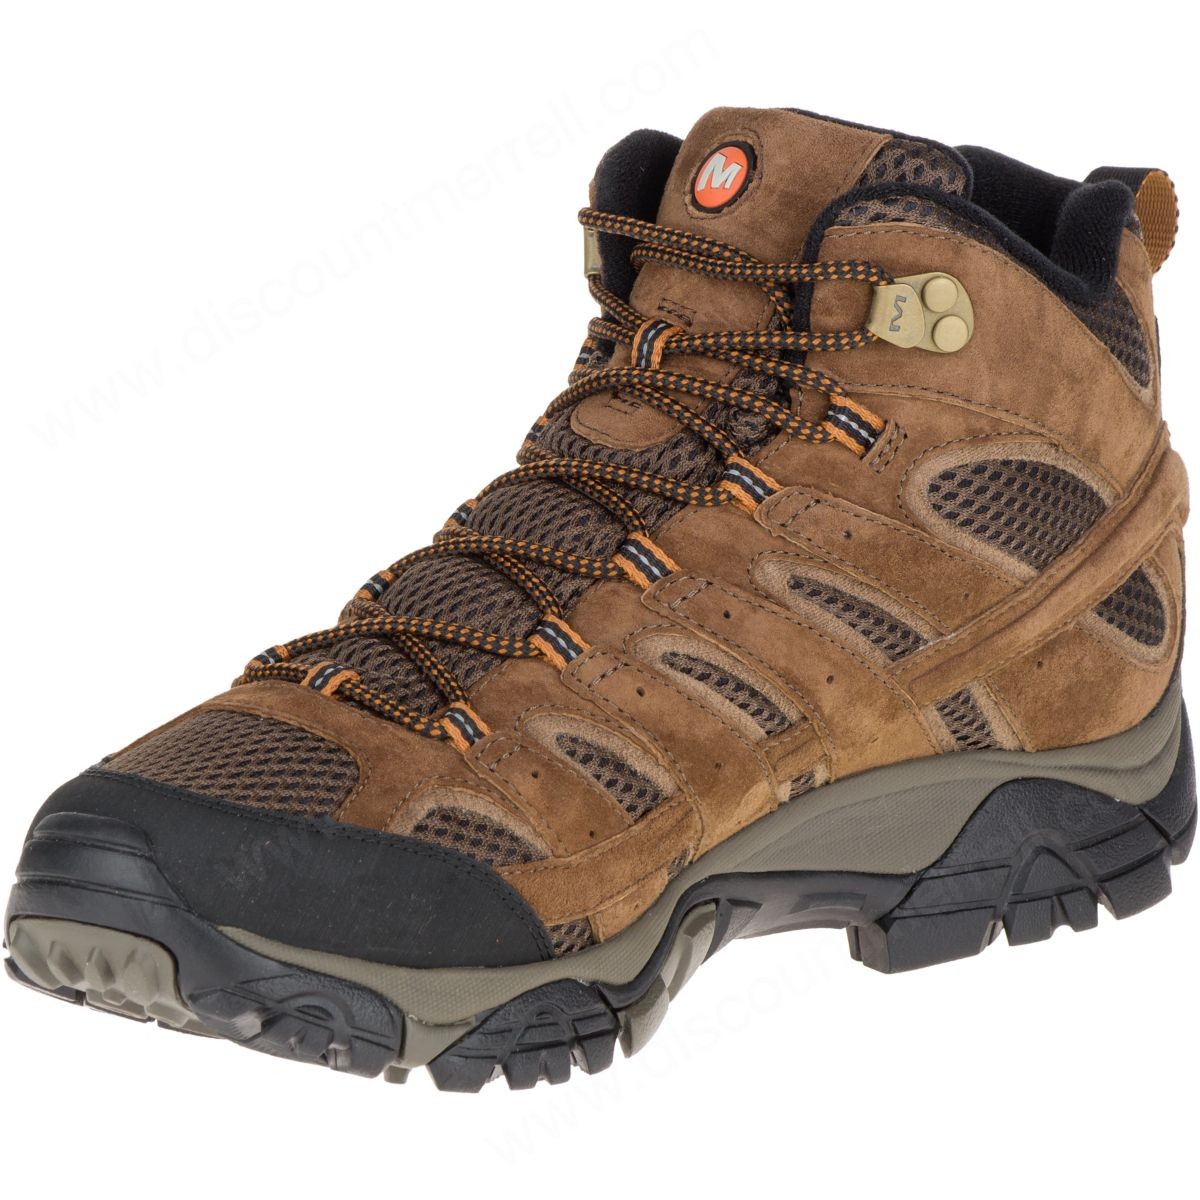 Merrell Man's Moab Mother Of All Boots™ Mid Waterproof Earth - -5